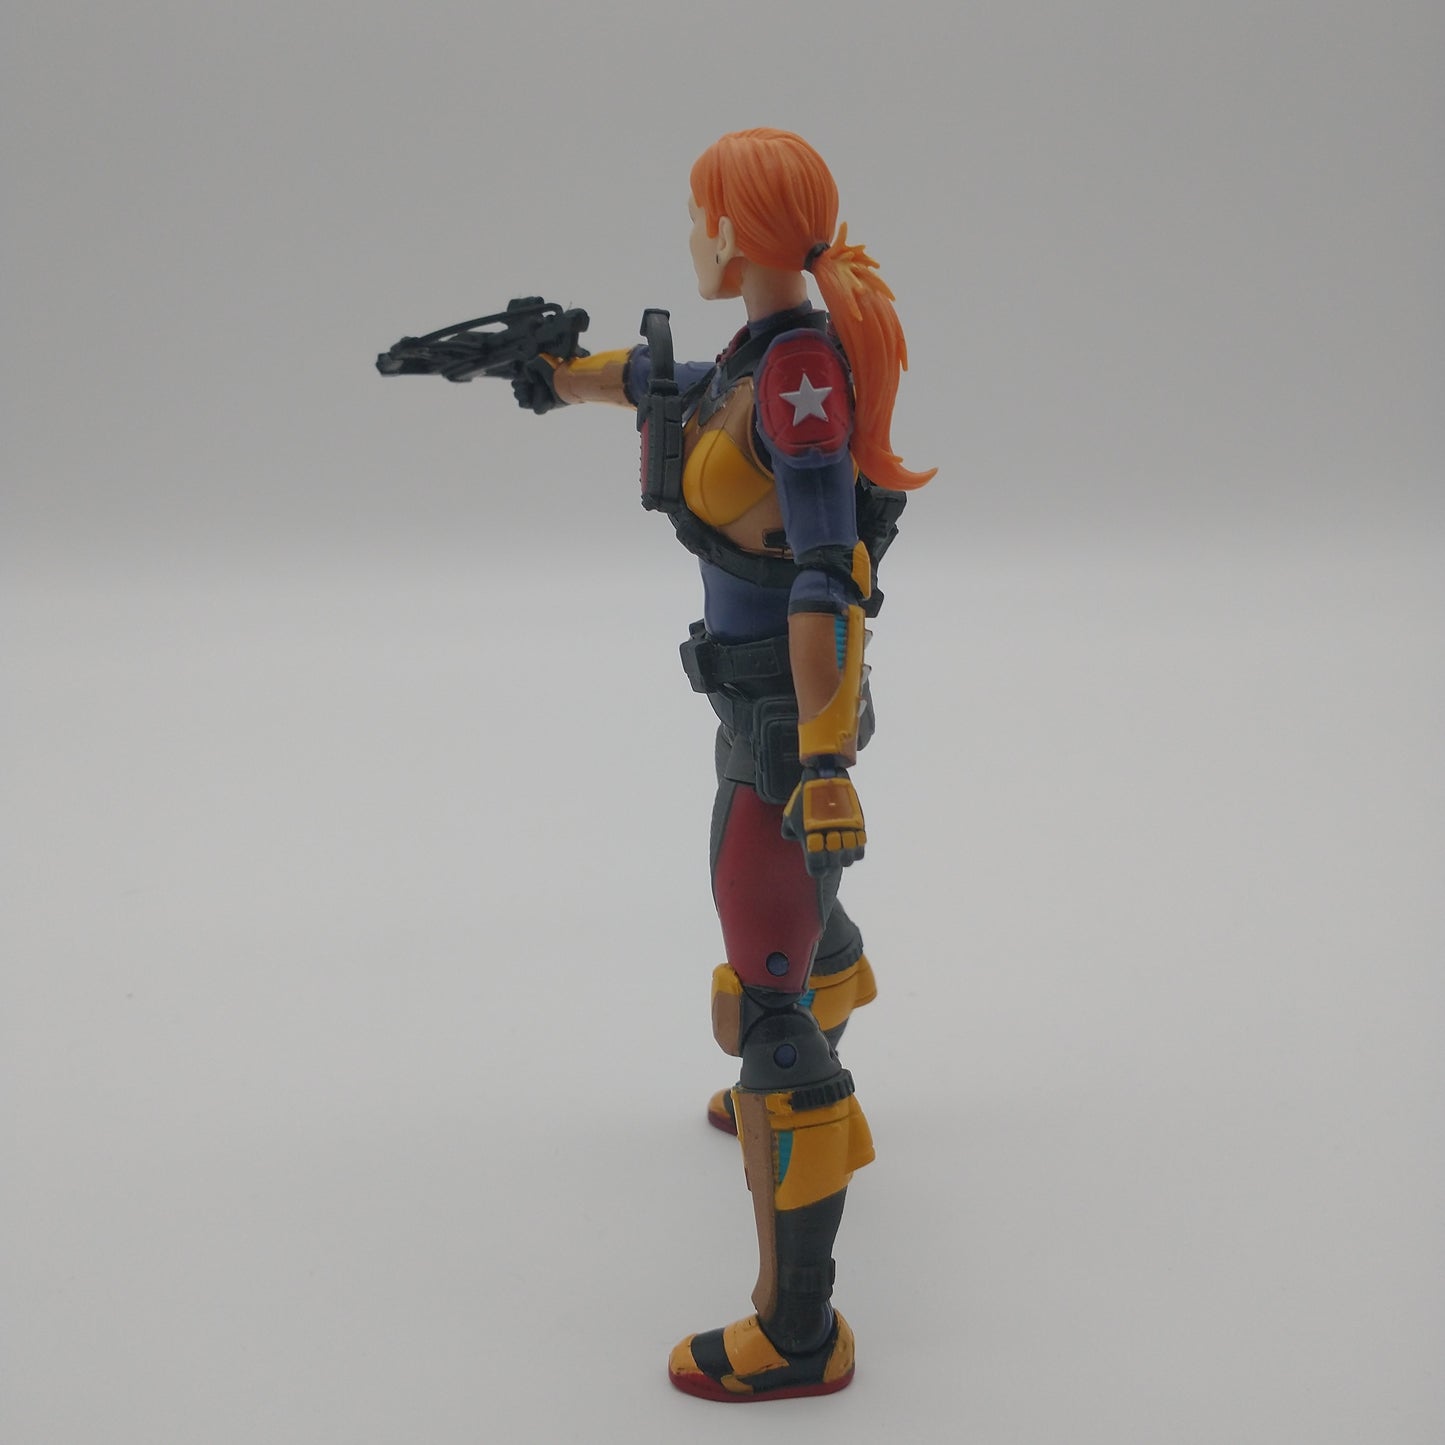 The action figure from the left side